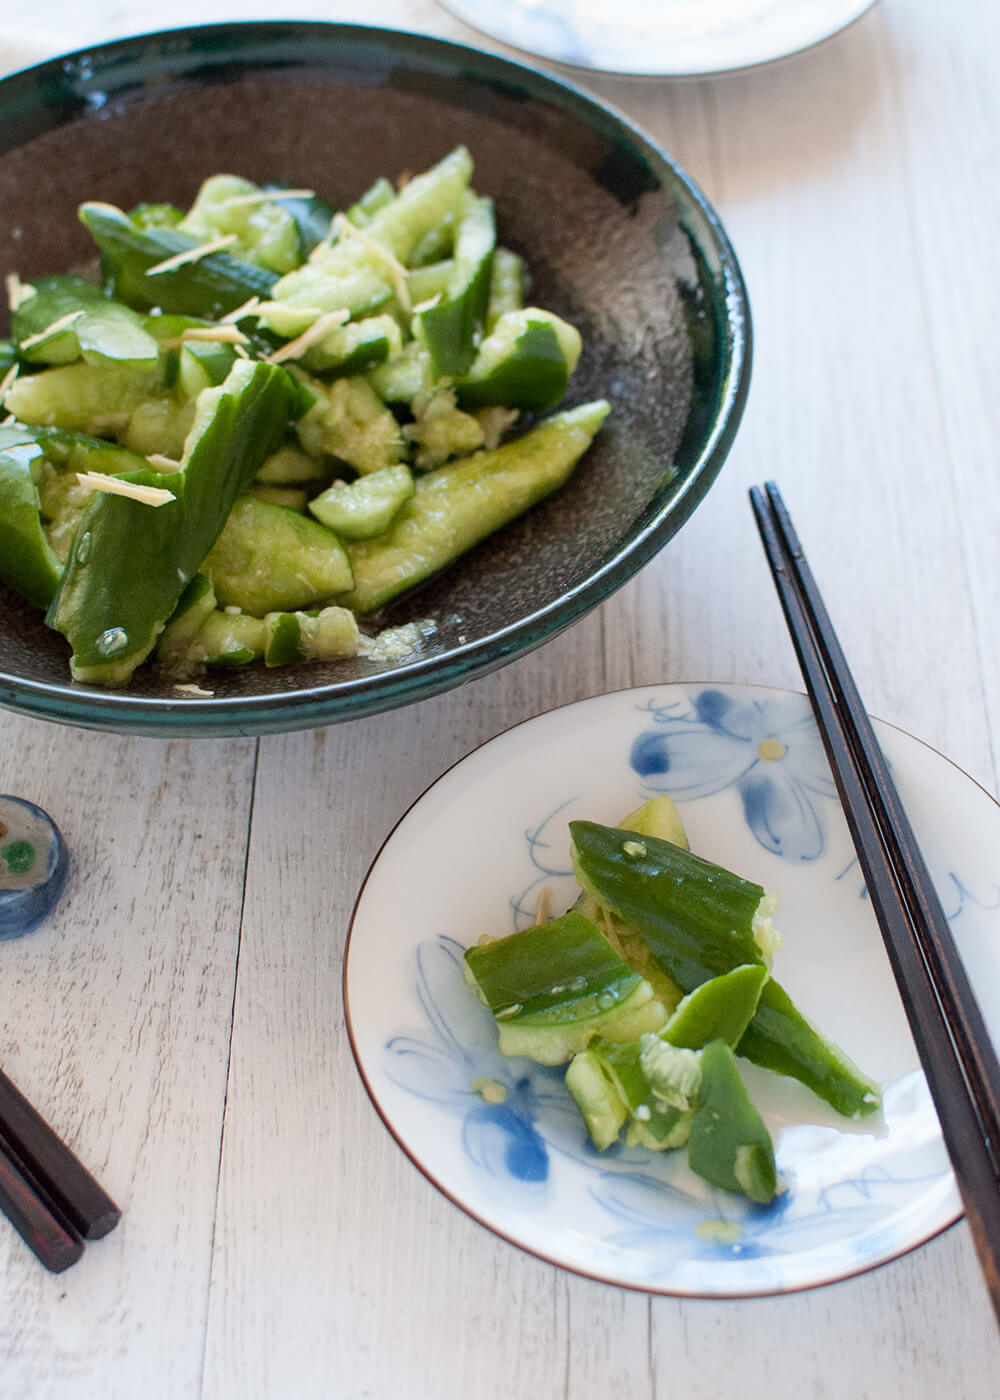 Tataki kyuri is a simple but unique cucumber salad. By smashing the cucumbers, the dressing penetrates into each piece. Ginger and soy sauce in the dressing gives this salad a Japanese touch.